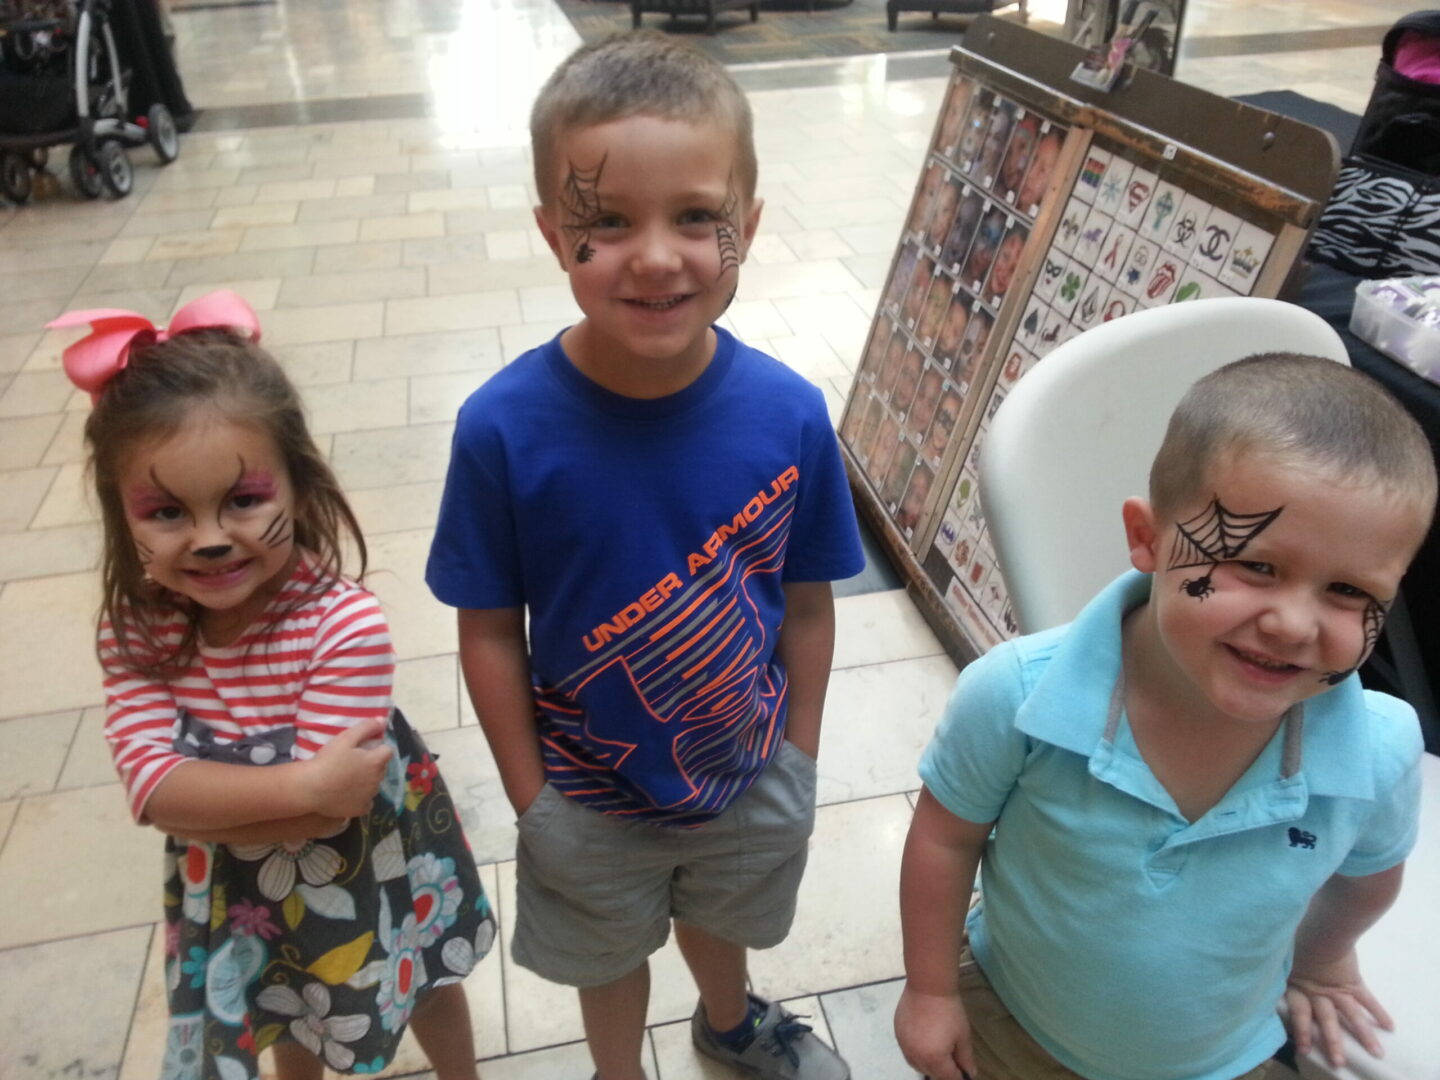 Two Young Boys With Spider Web Face Paint and a Young Girl